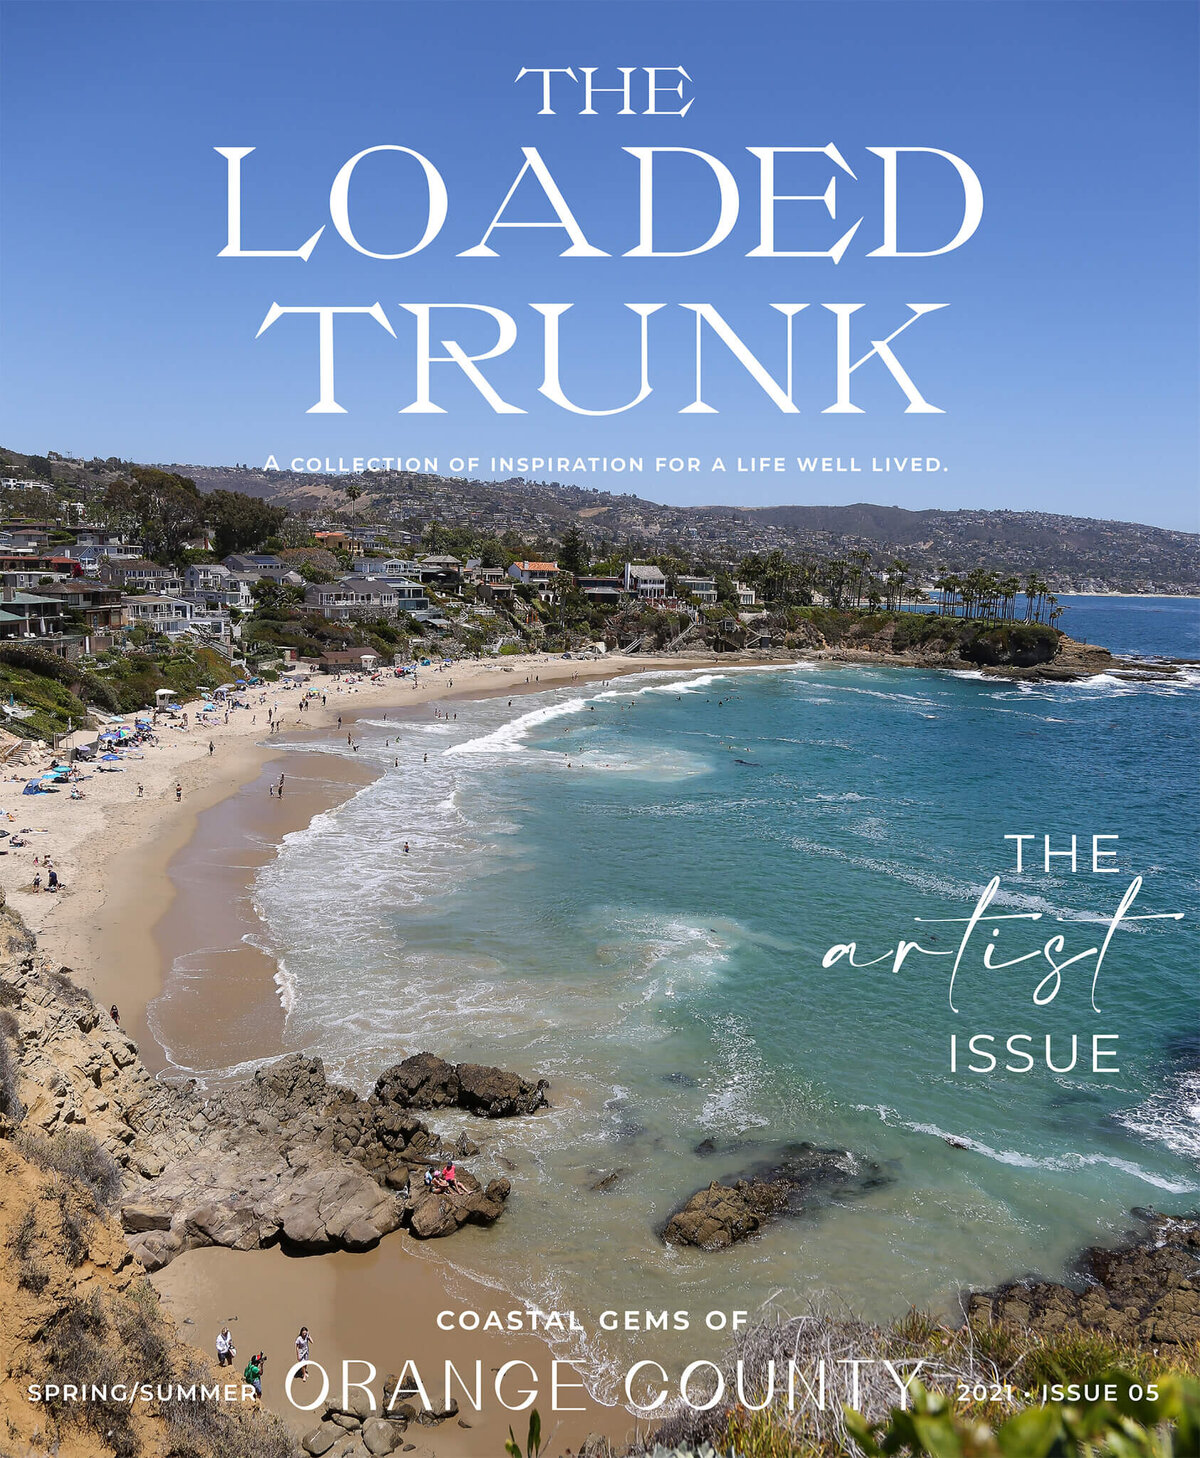 The-Loaded-Trunk-Travel-Magazine-Orange-County-Issue